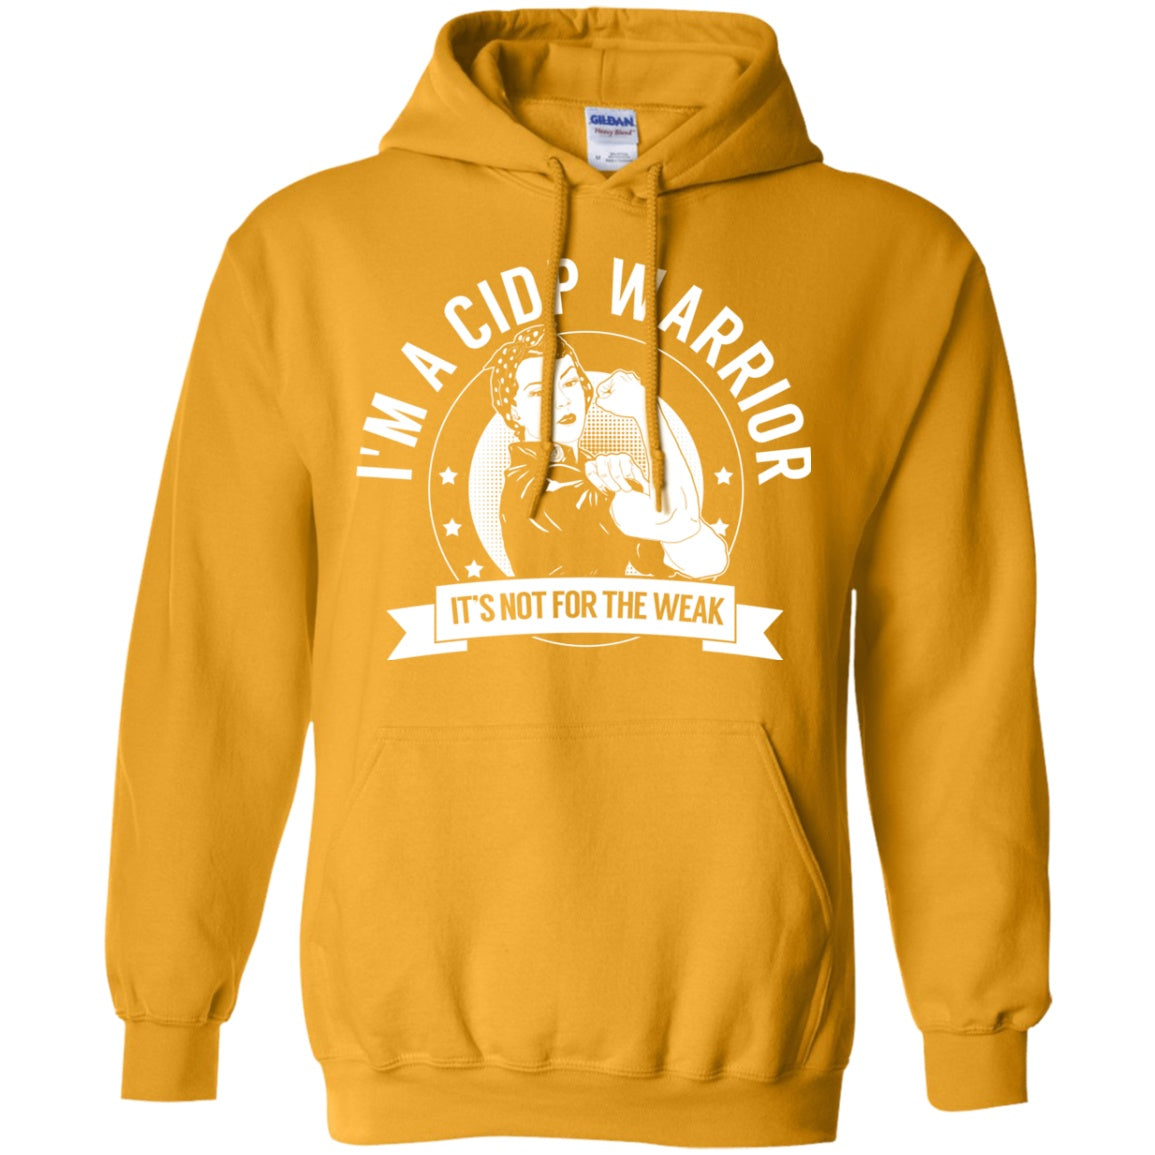 Chronic Inflammatory Demyelinating Polyneuropathy - CIDP Warrior NFTW Pullover Hoodie 8 oz. - The Unchargeables